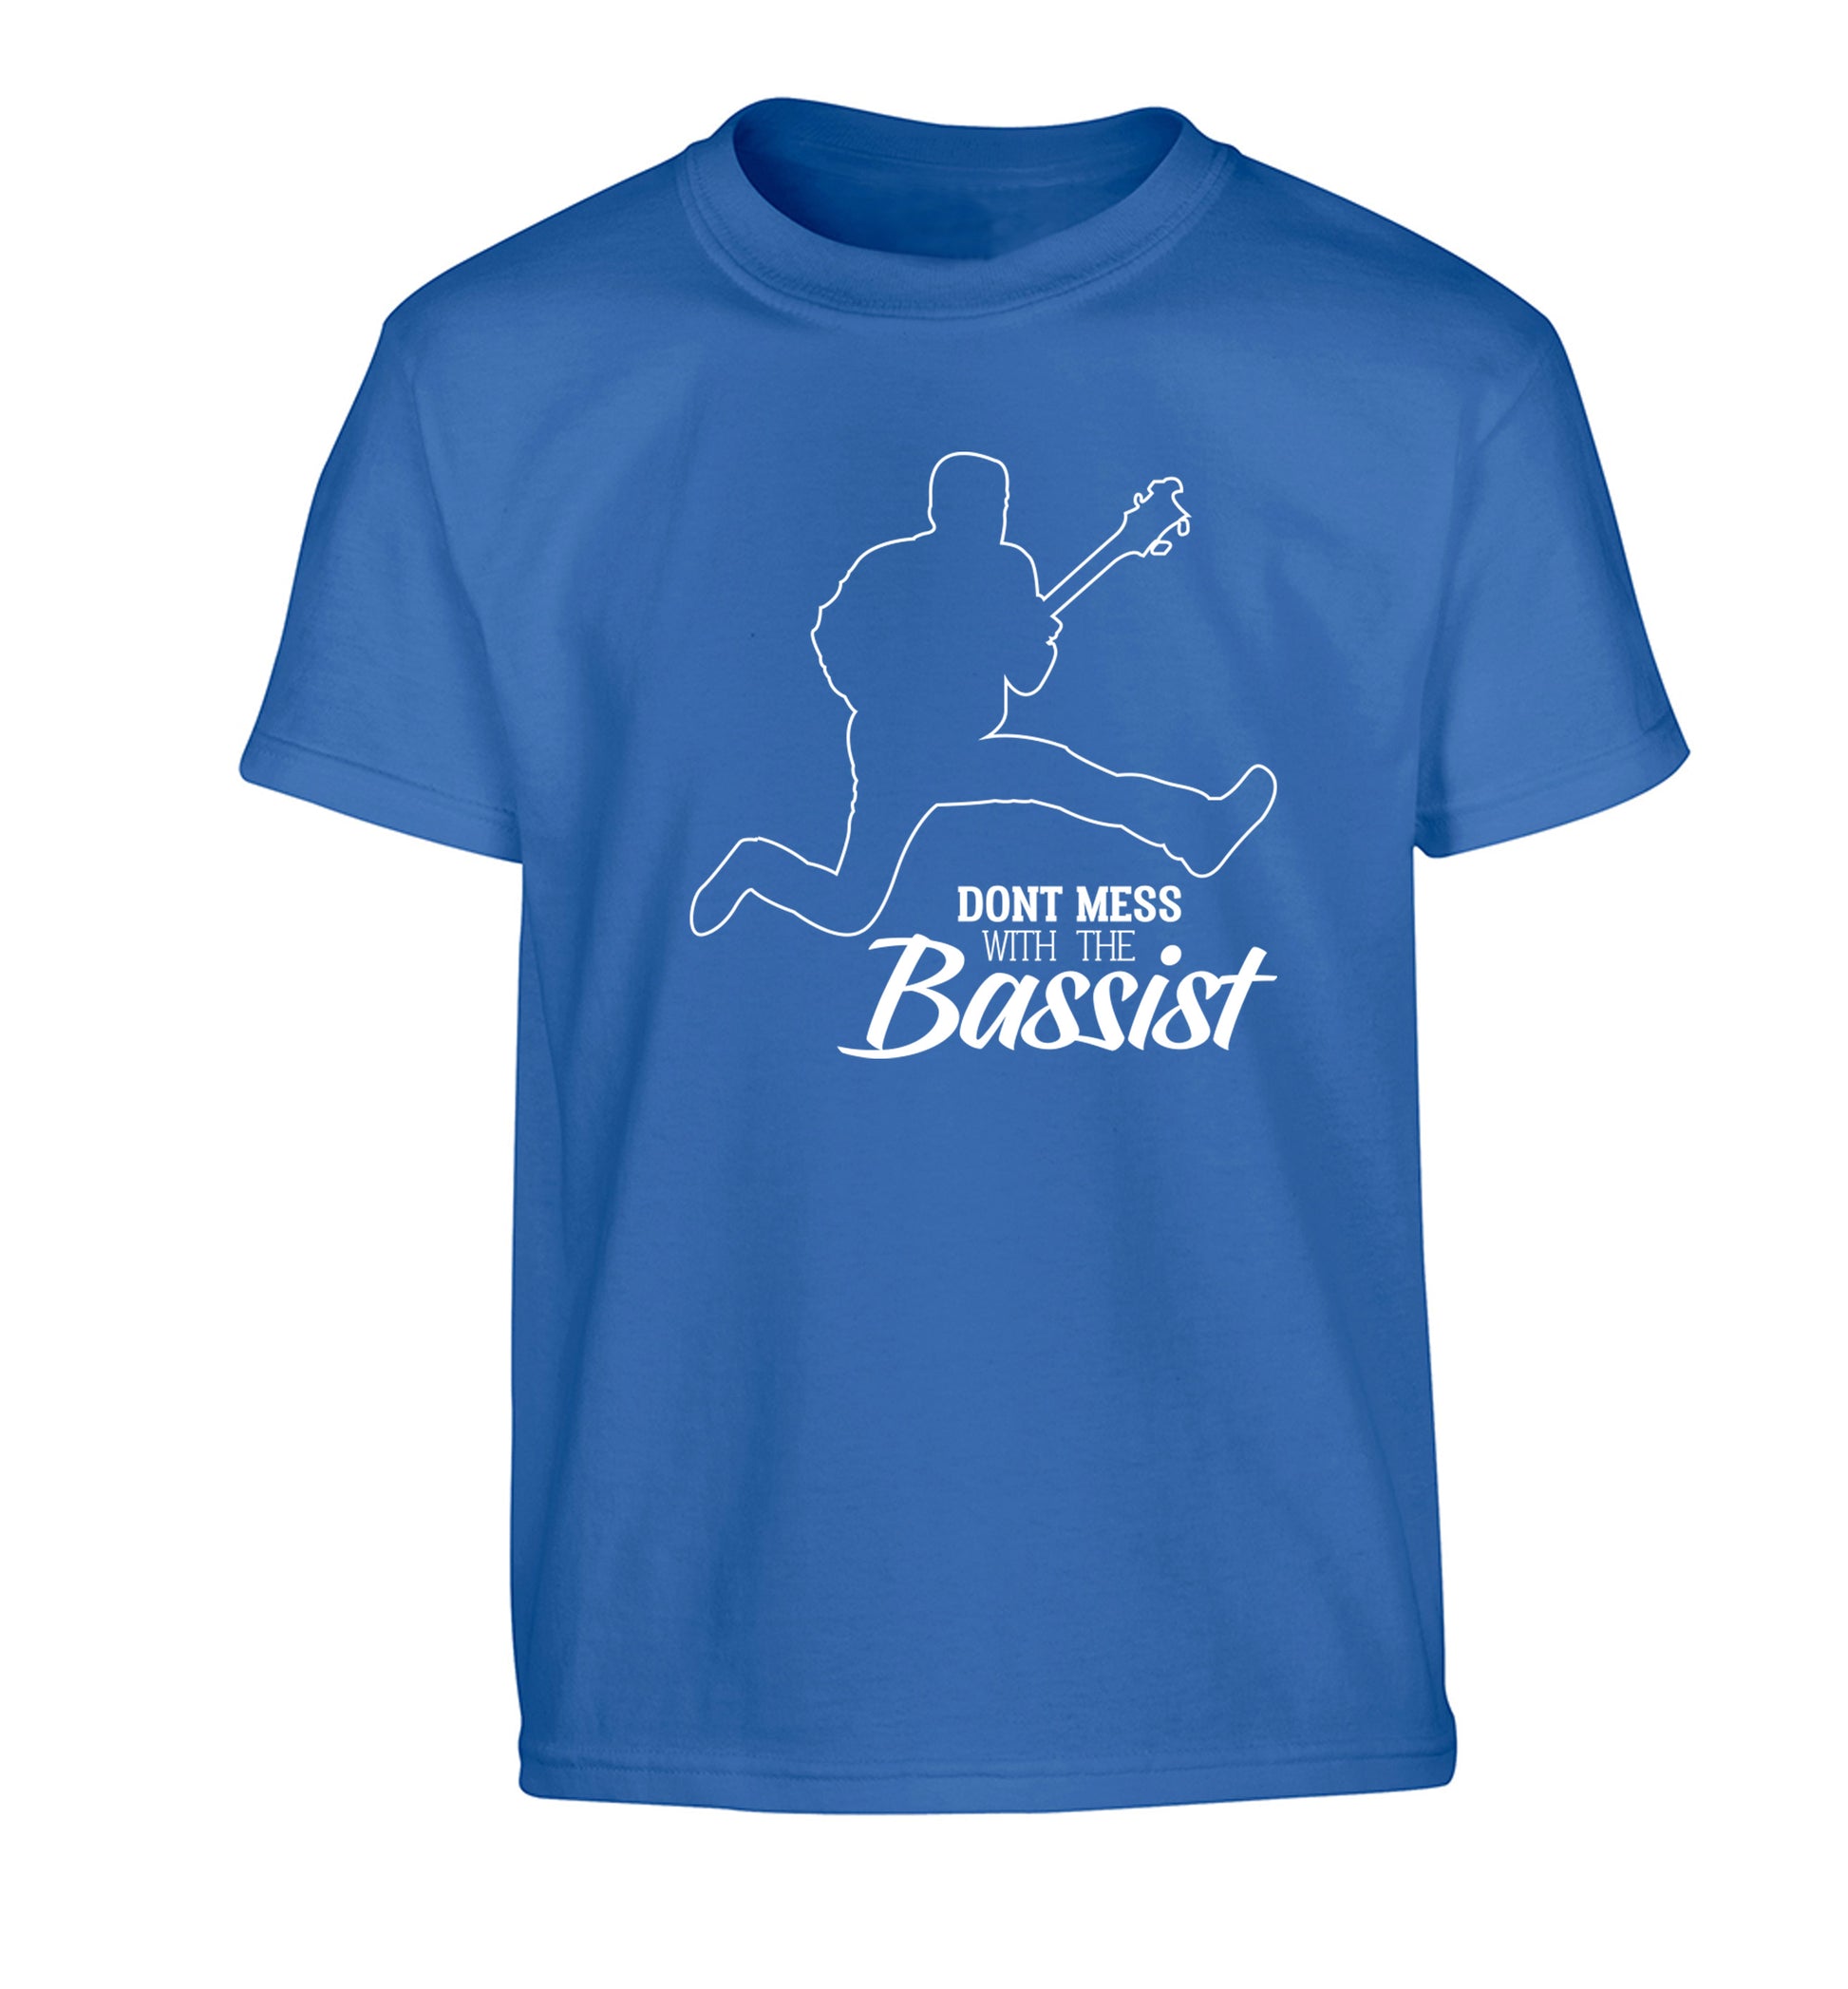 Dont mess with the bassist Children's blue Tshirt 12-13 Years